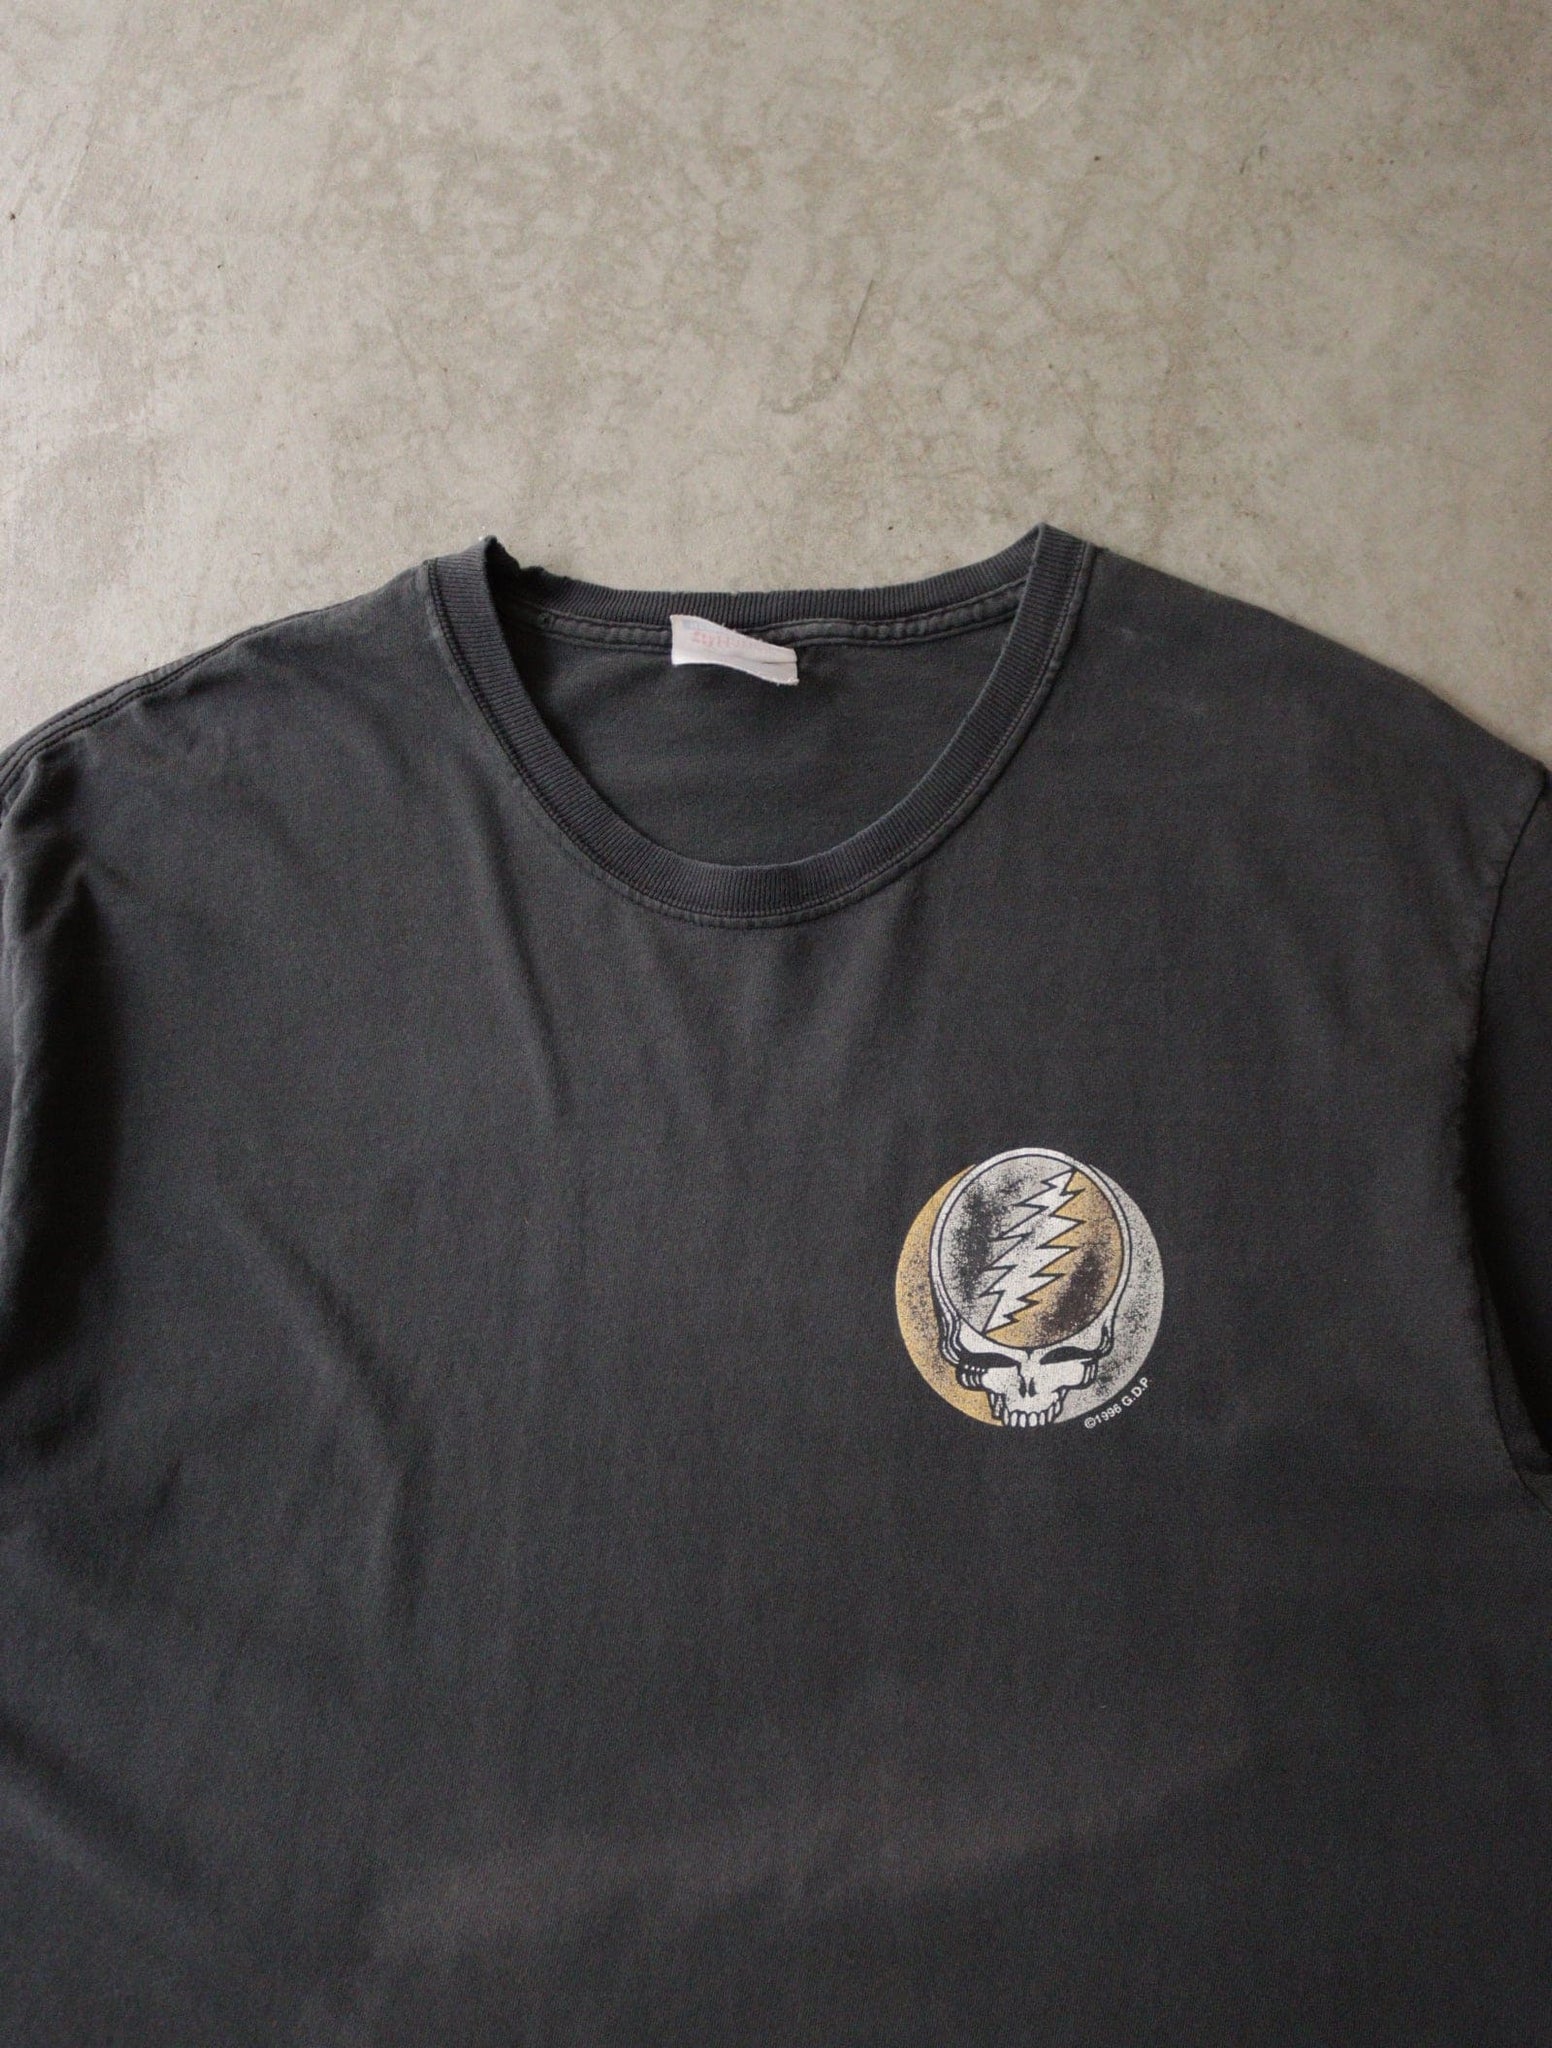 1990S GRATEFUL DEAD FADED BAND TEE